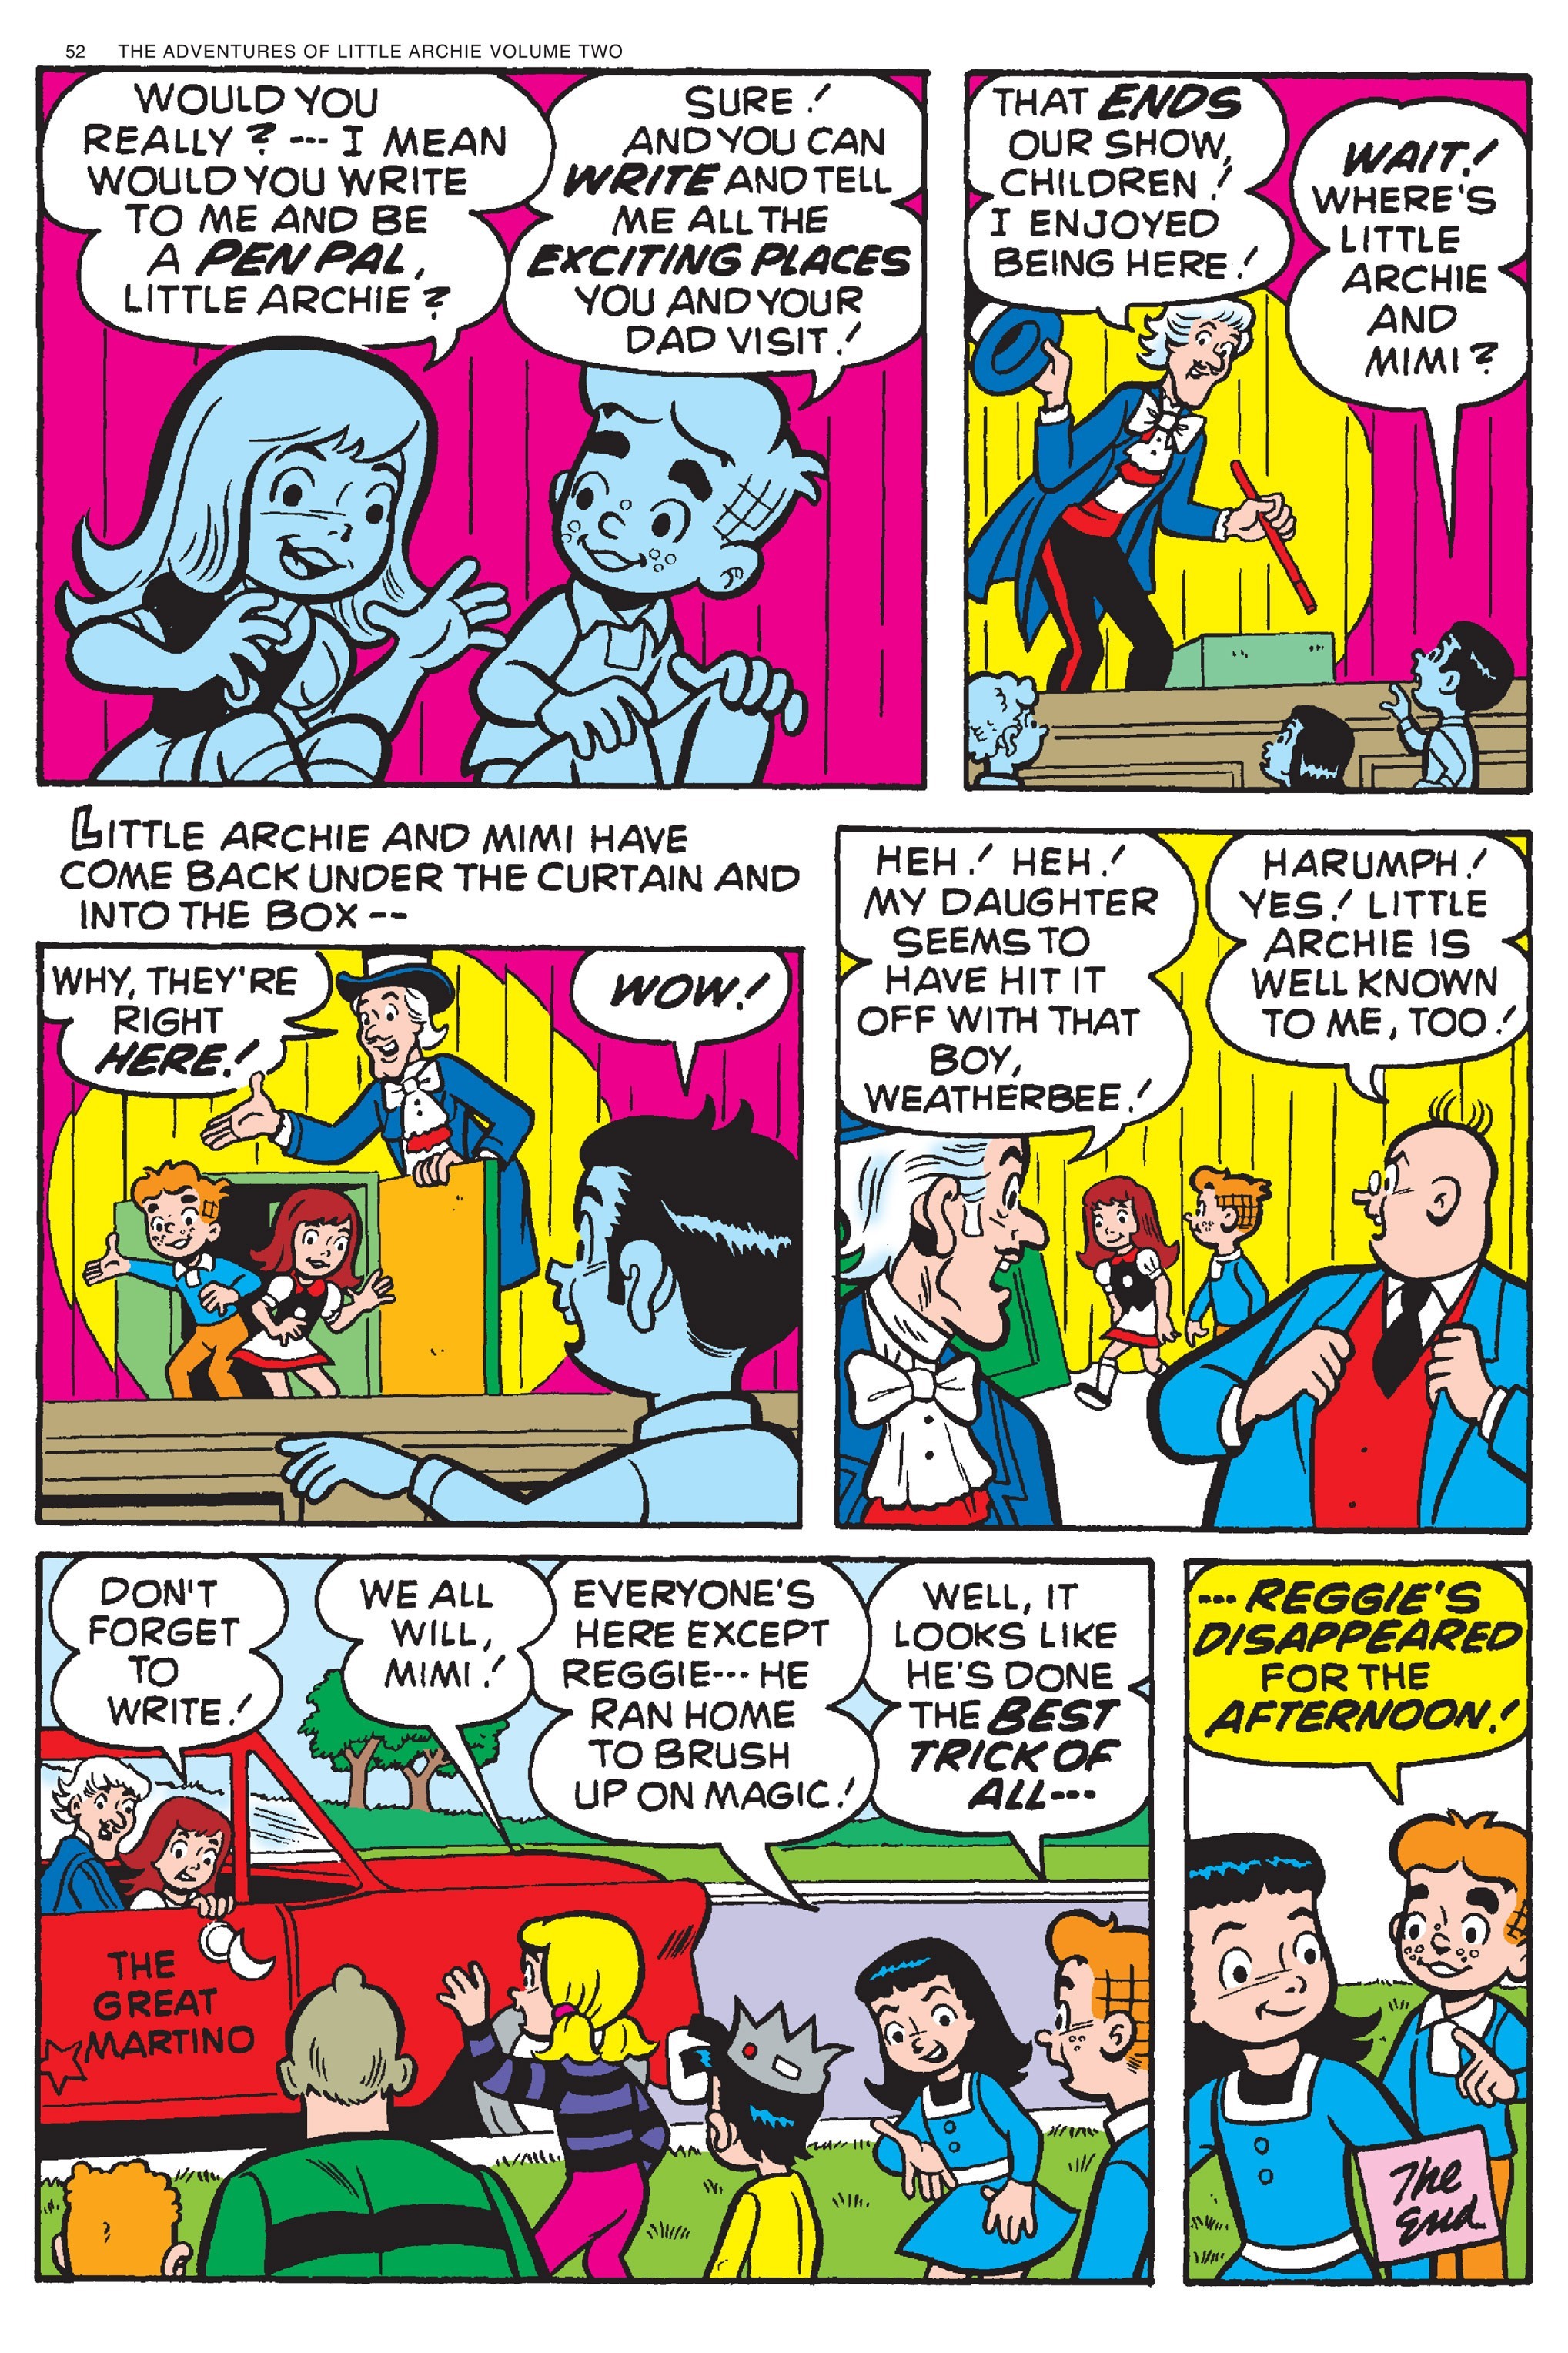 Read online Adventures of Little Archie comic -  Issue # TPB 2 - 53